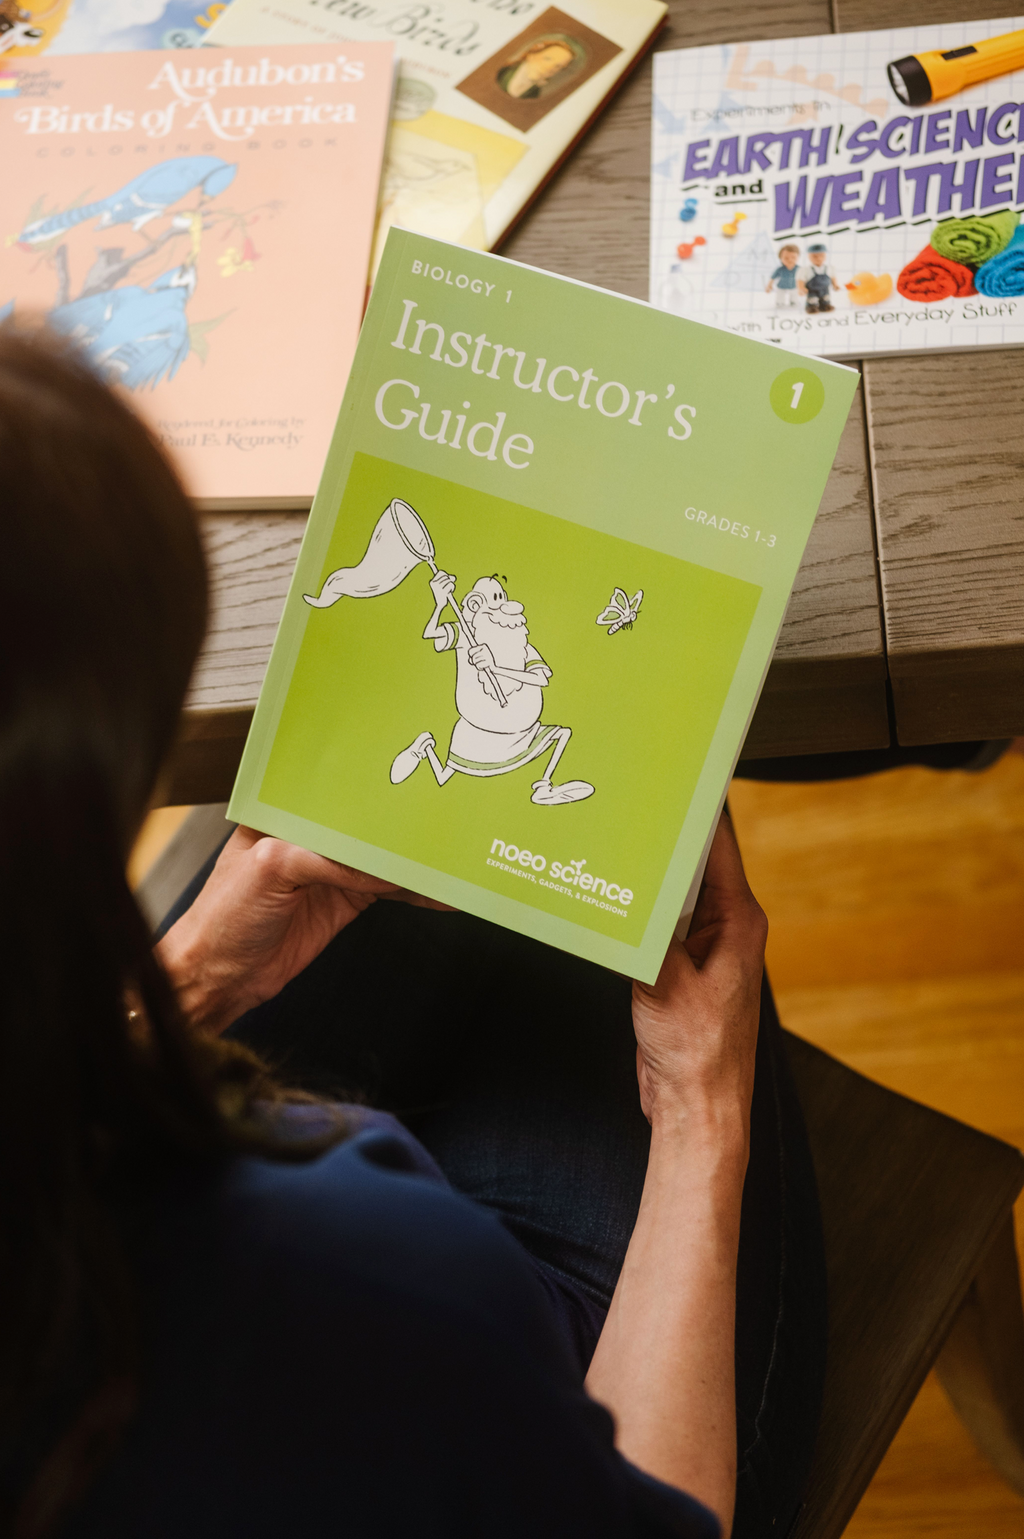 3. Instructor's Guide